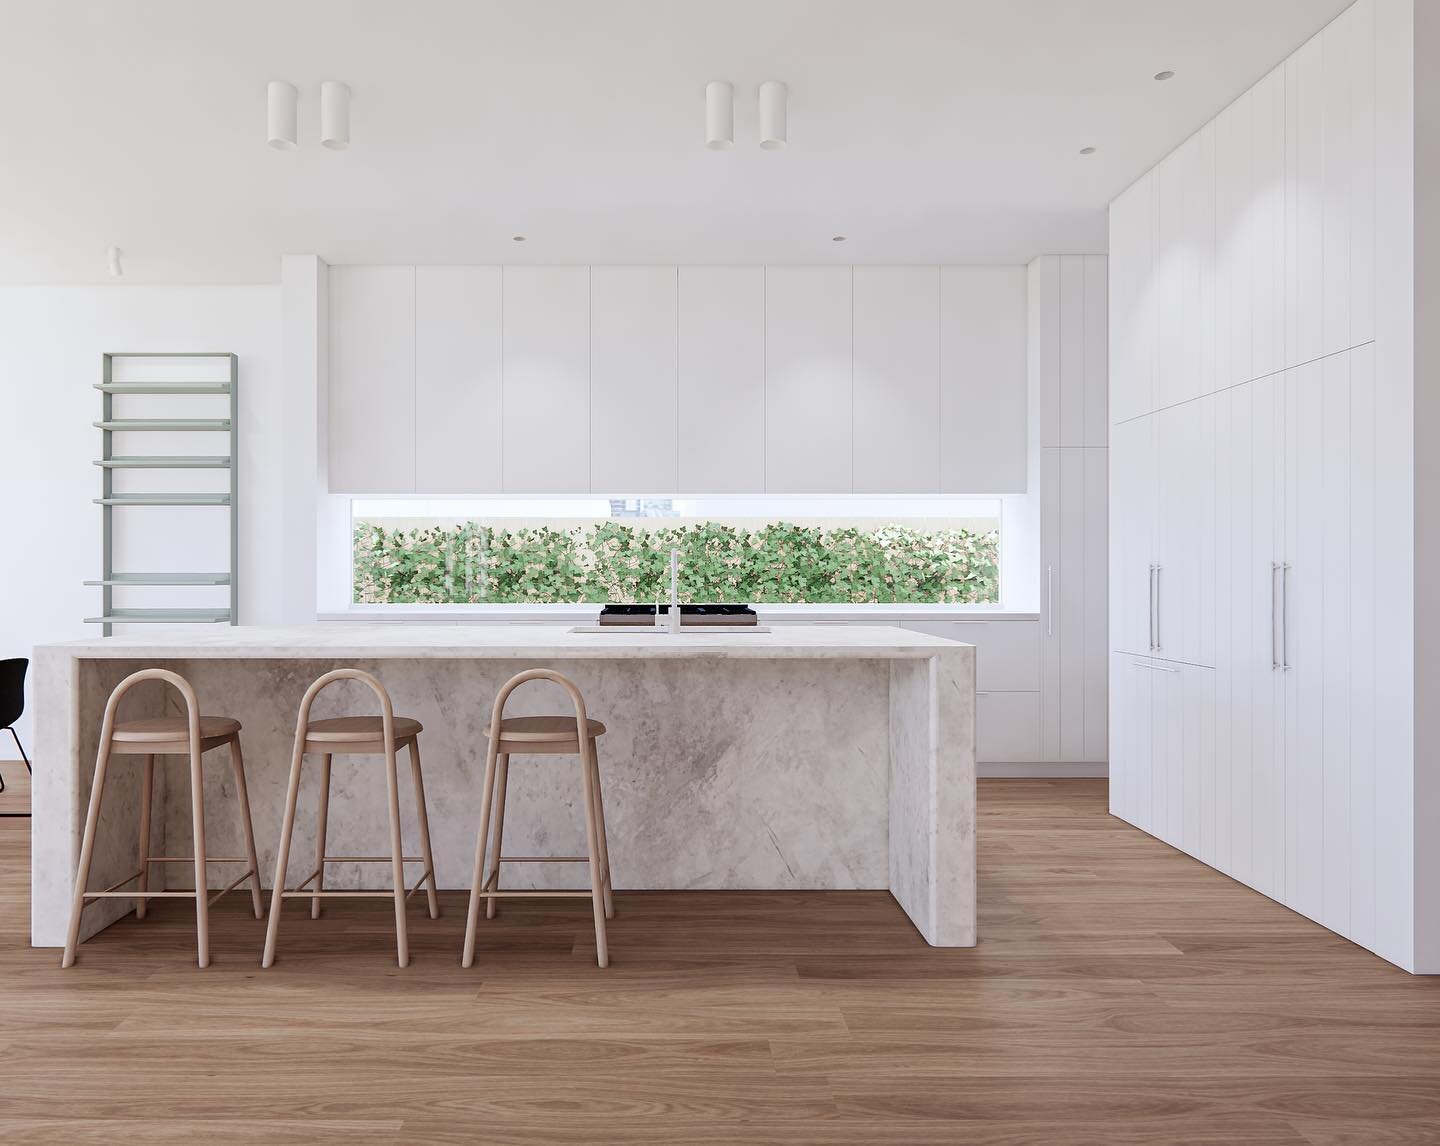 Florence House - Kitchen 

A render of the kitchen in our Florence House project which is currently in design development. 

The island is to be the hero of this space, it will be wrapped in marble and the waterfall ends will feature rounded edges to